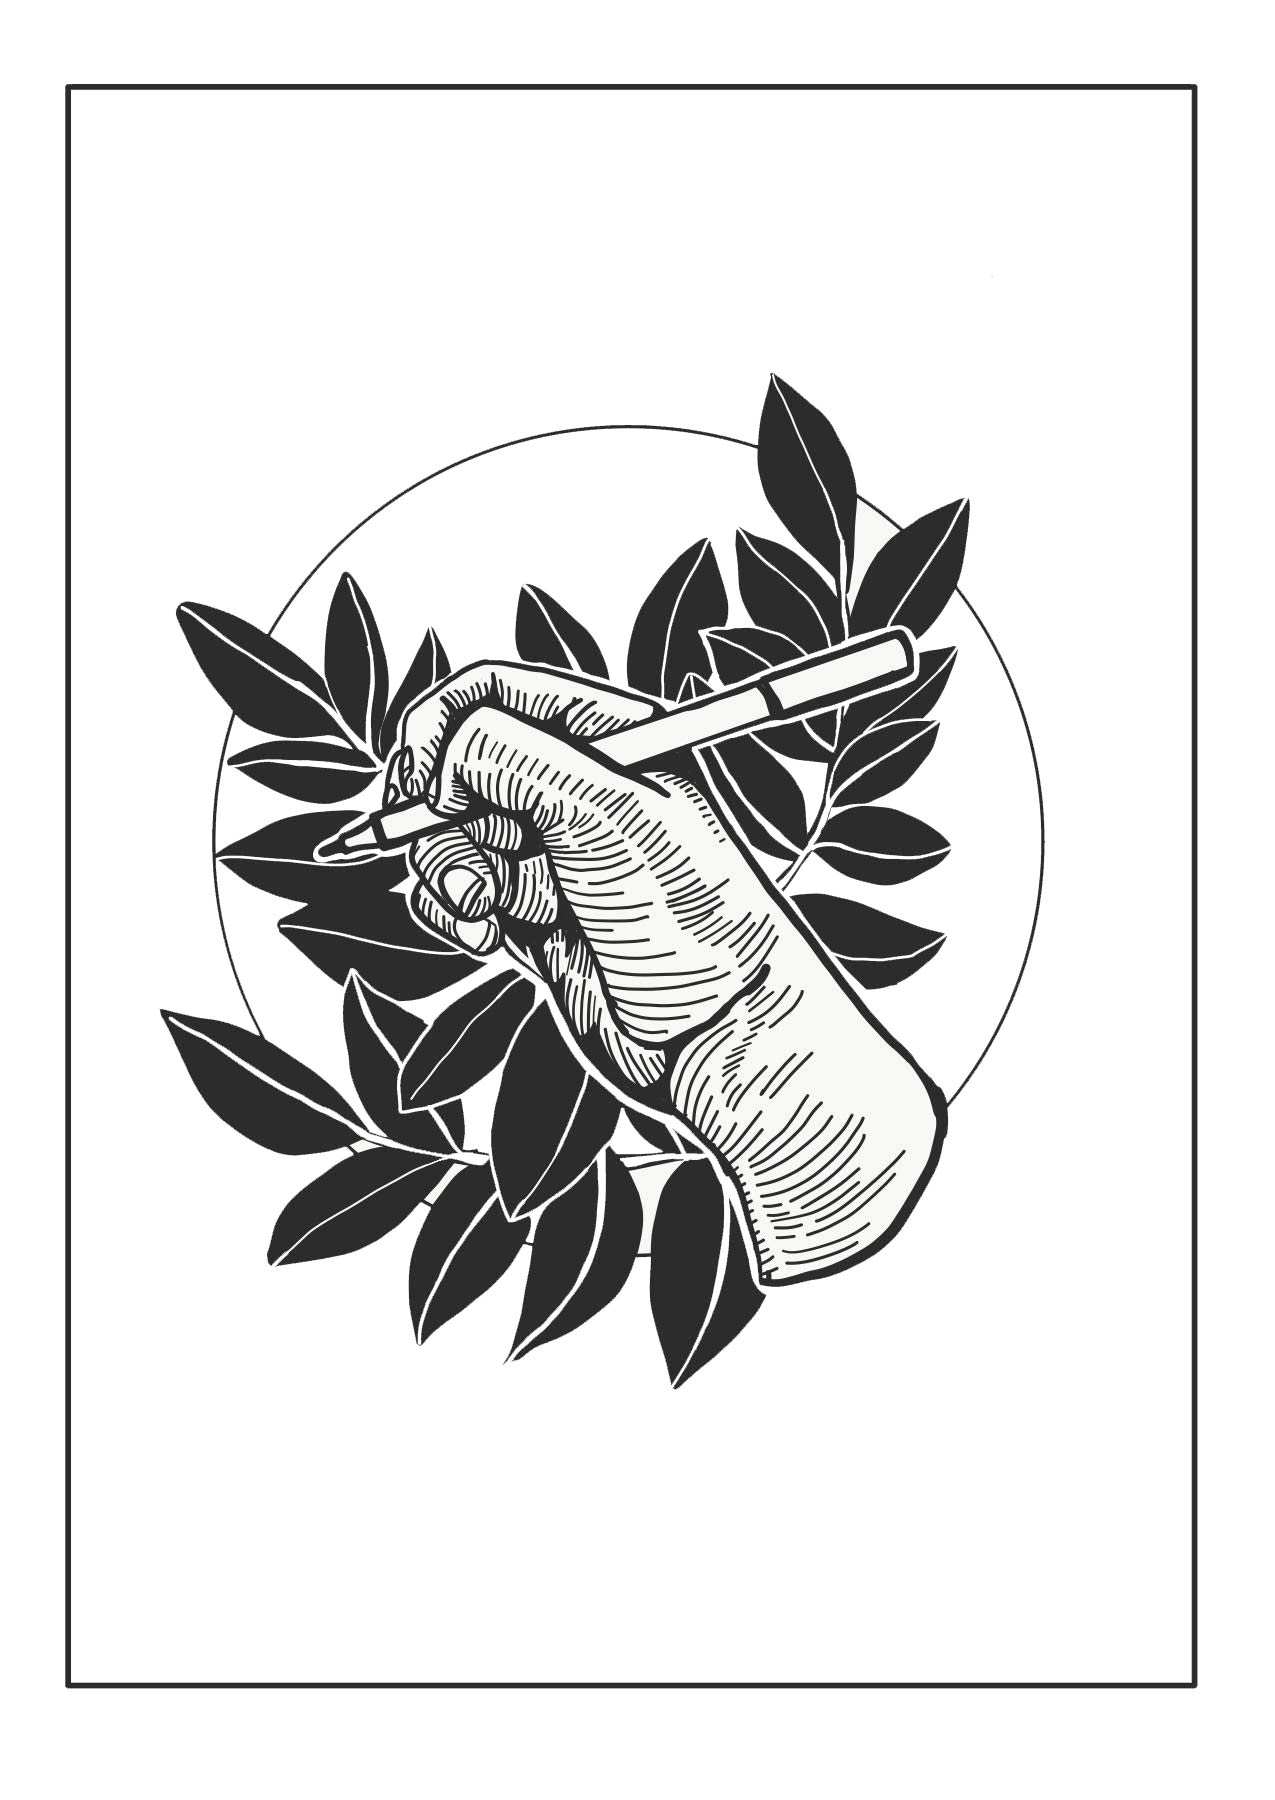 Illustration of a hand holding a pen with leaves in the background